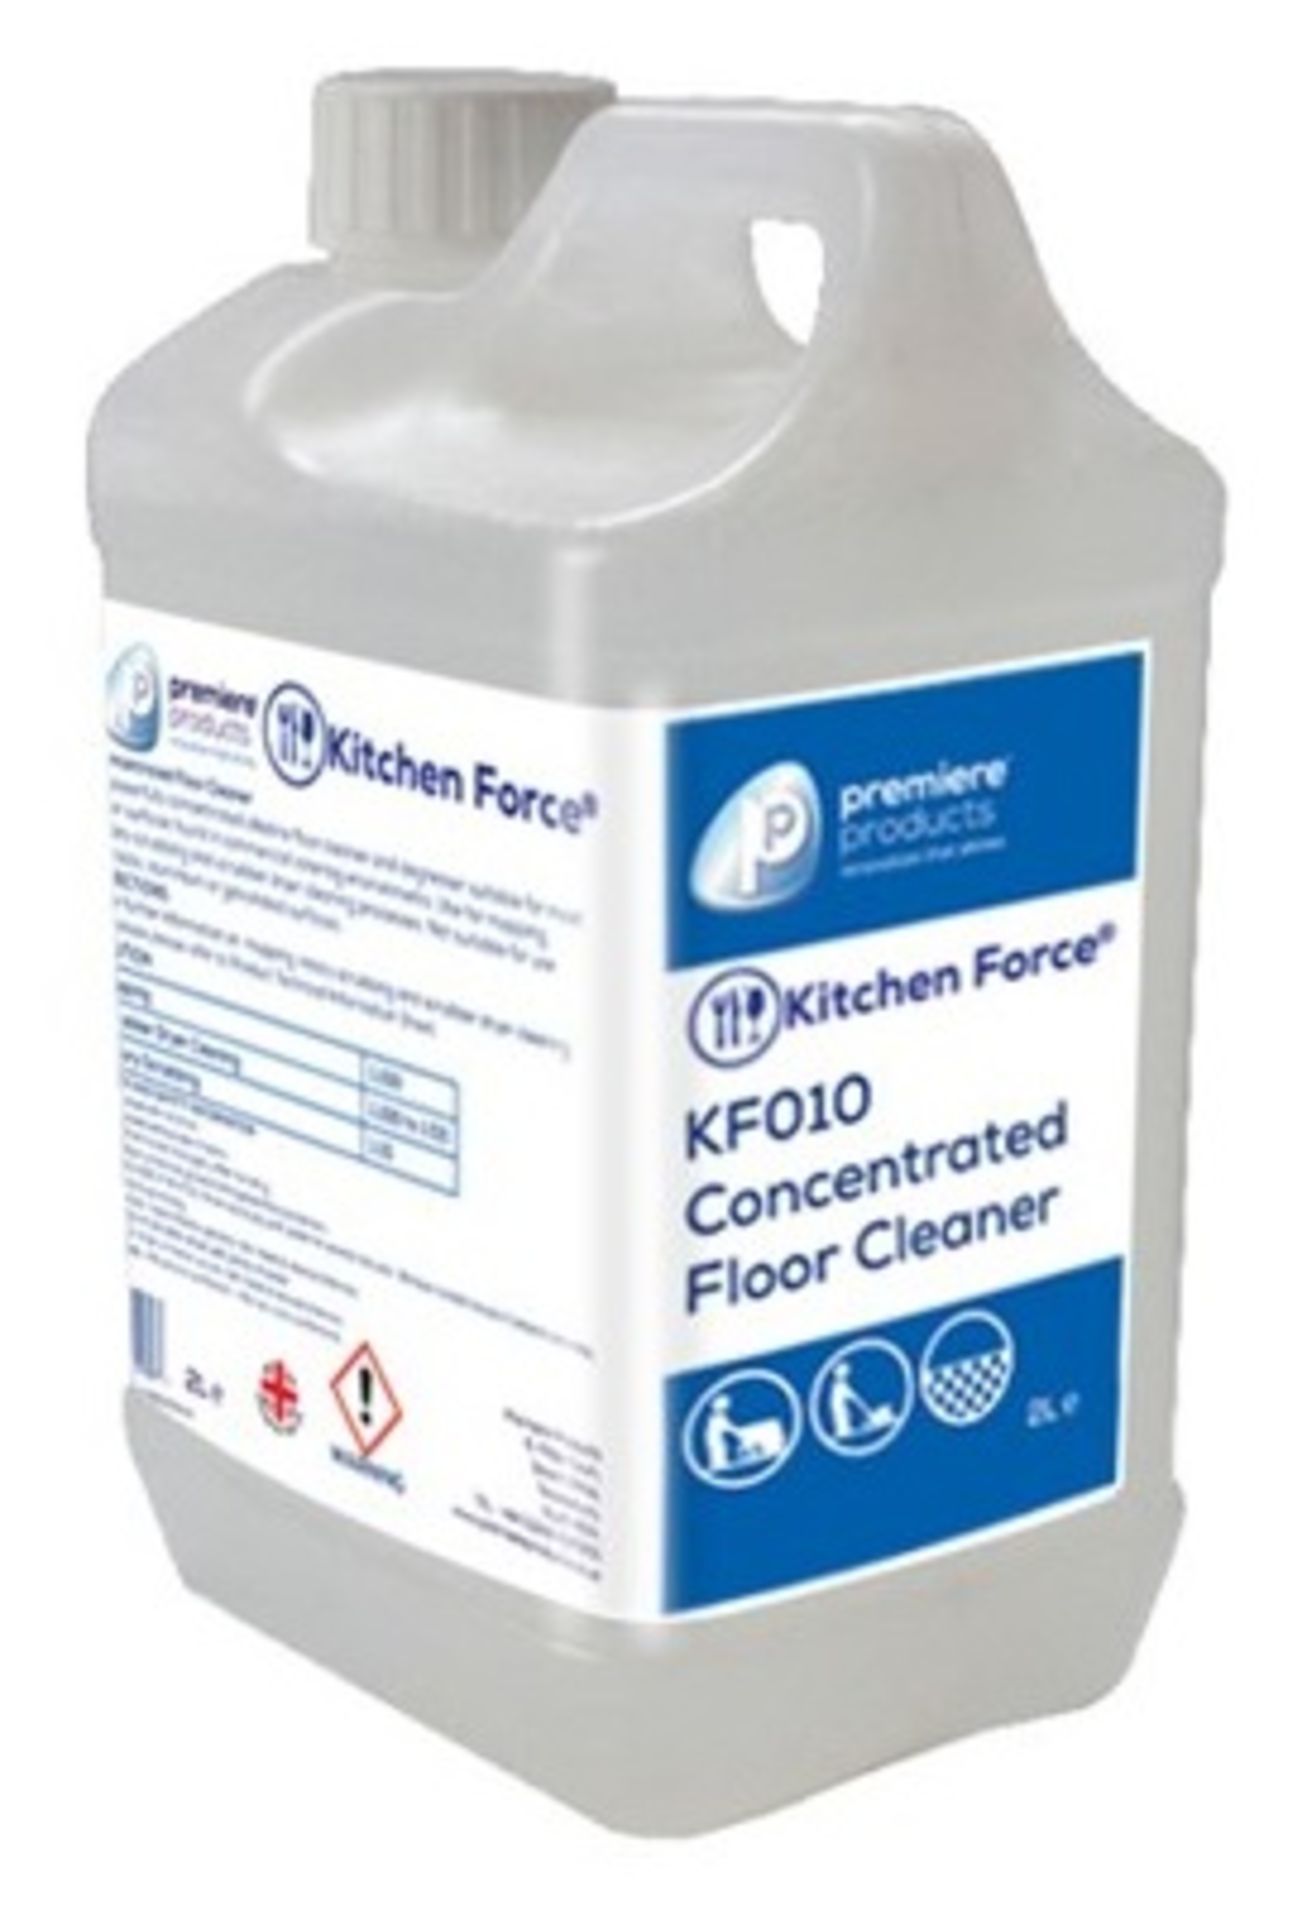 40 x Kitchen Force 2 Litre Concentrated Floor Cleaner - Premiere Products - Floor Cleaner & Degrease